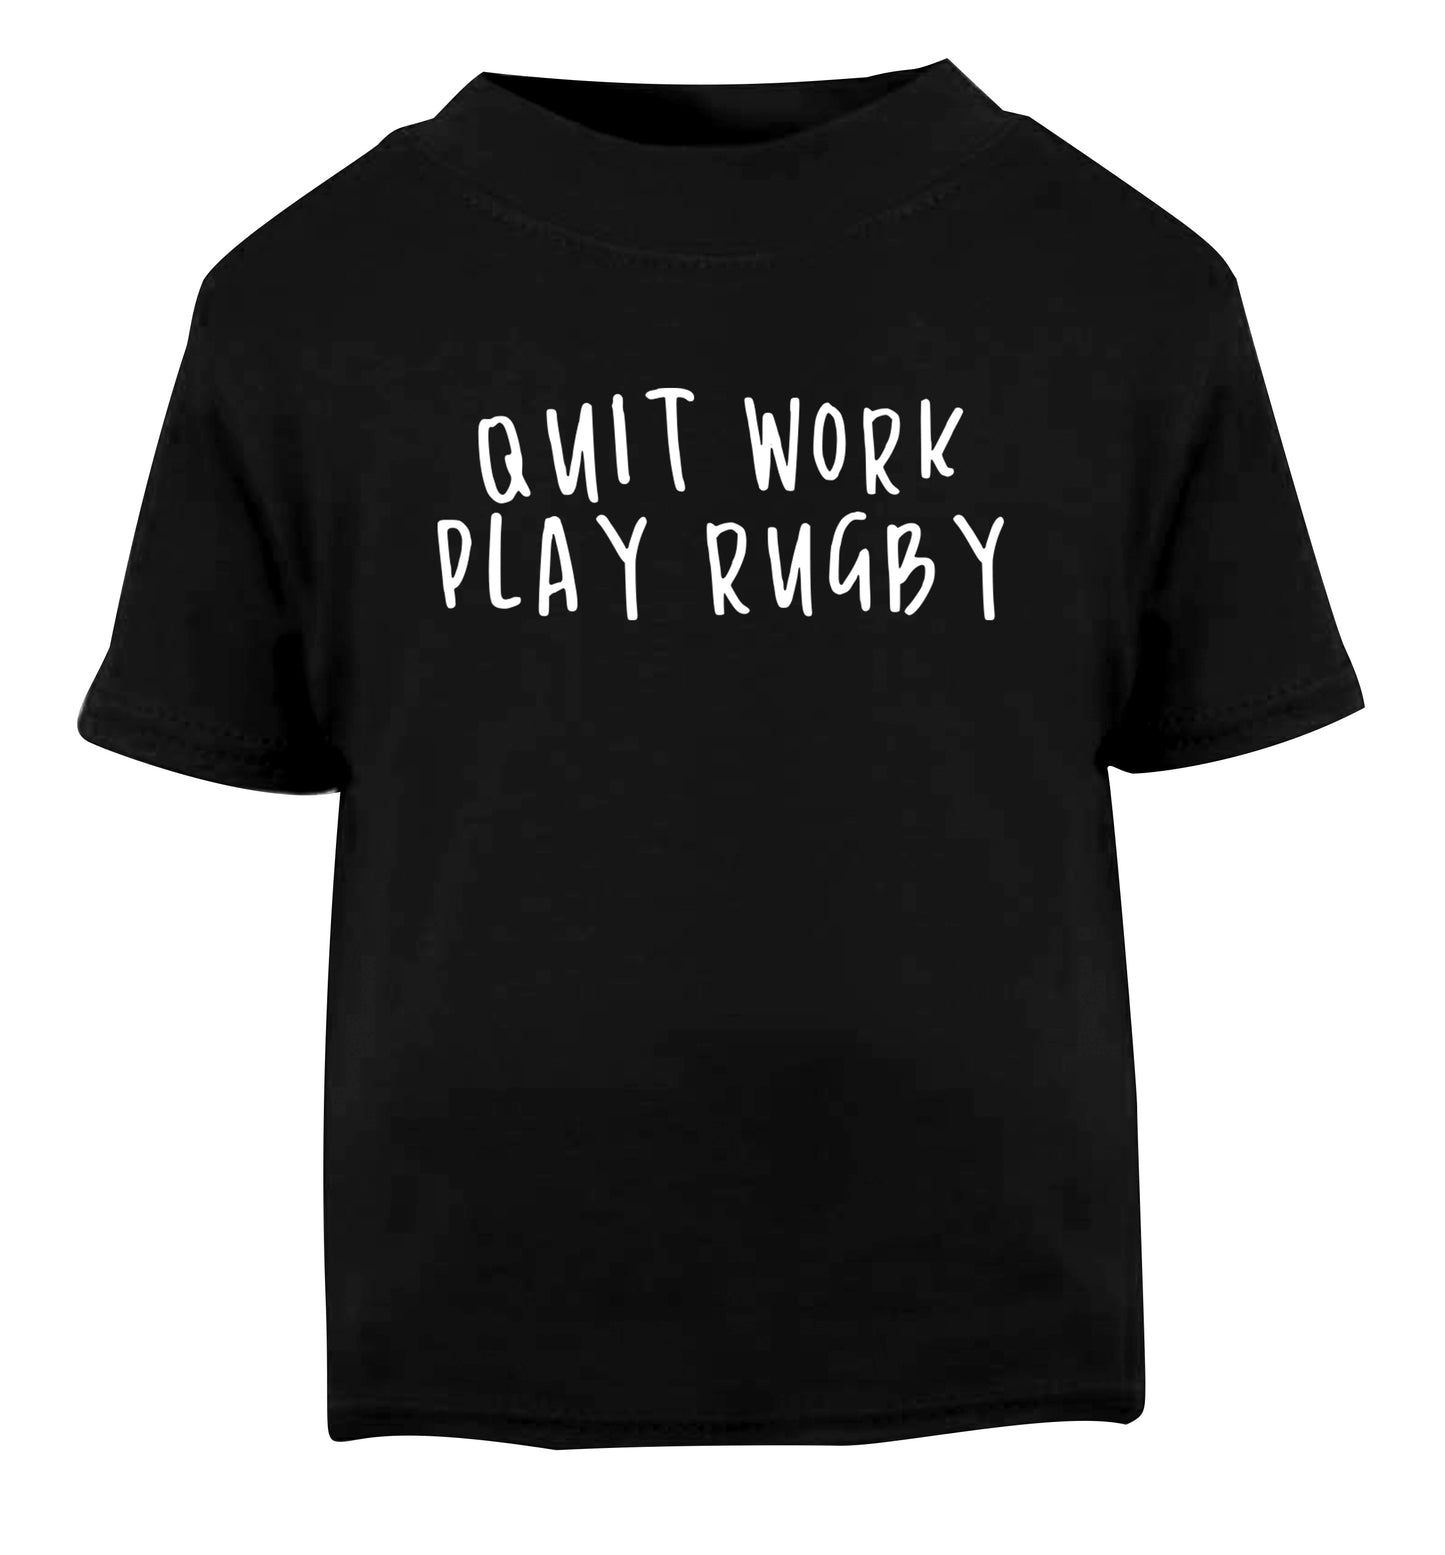 Quit work play rugby Black Baby Toddler Tshirt 2 years